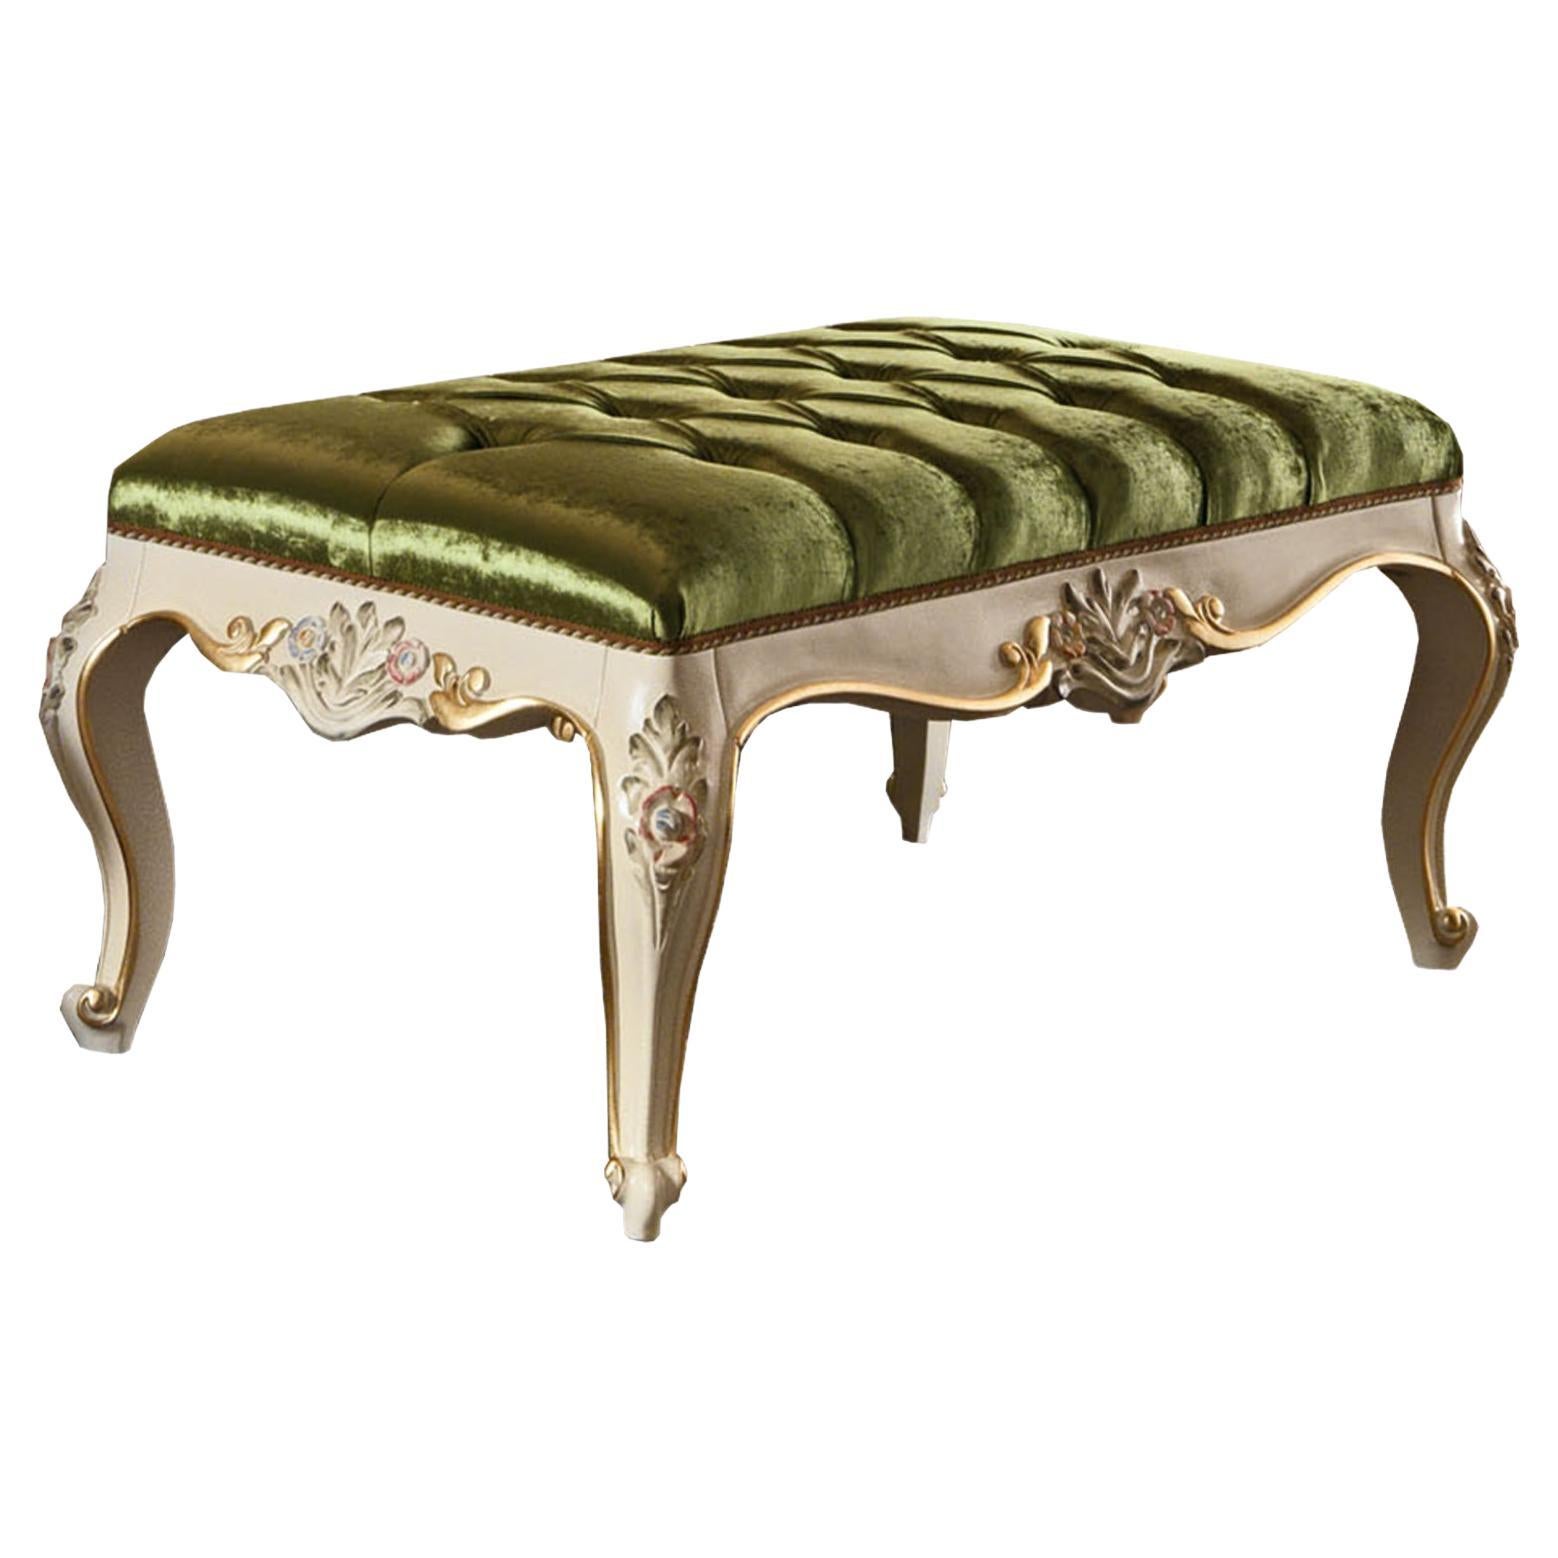 21st Century Handpainted Baroque Bed Bench by Modenese Interiors For Sale